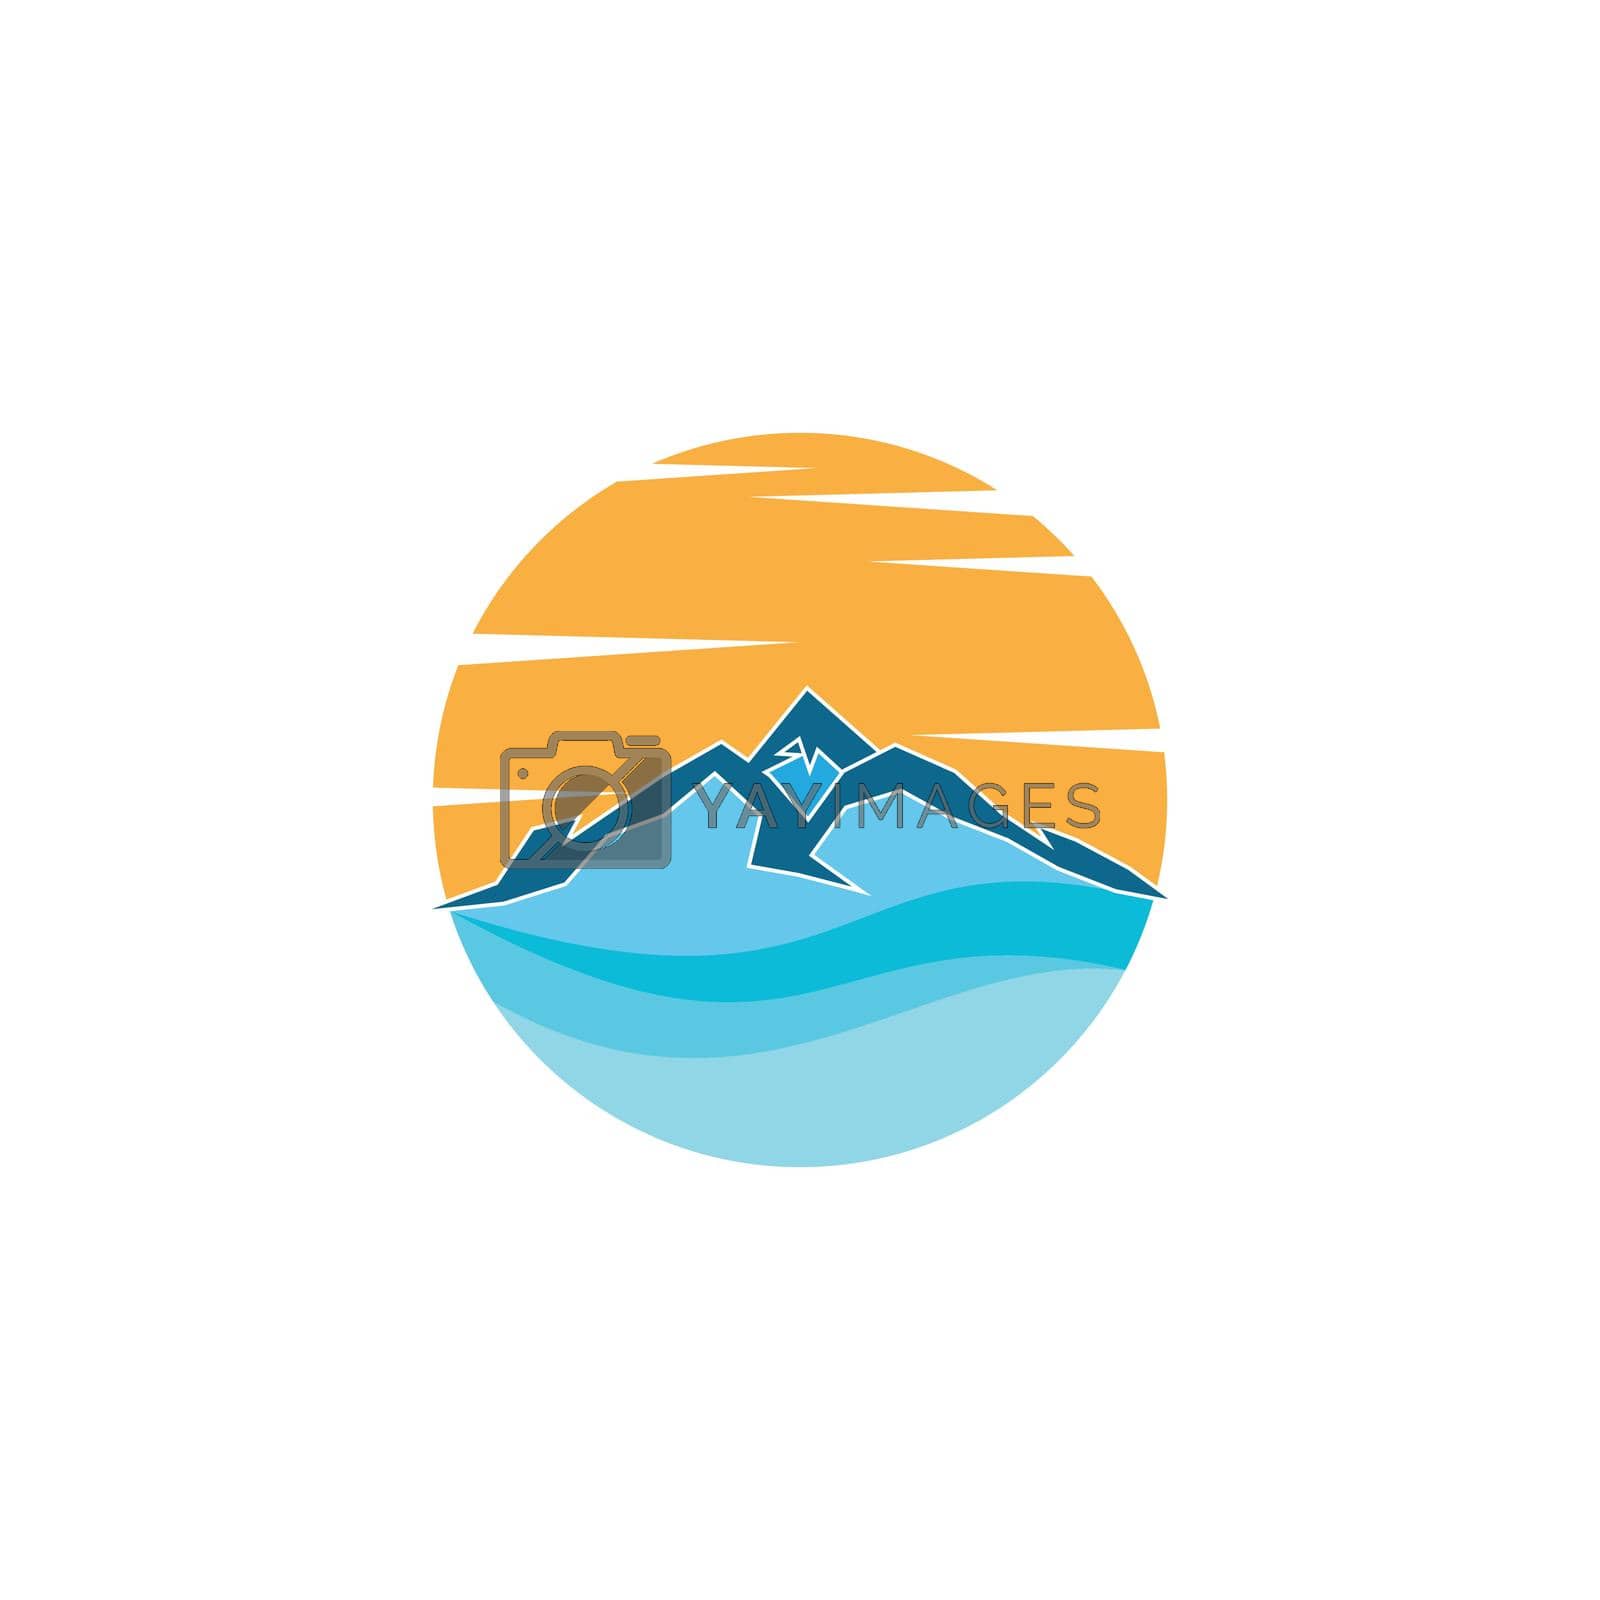 Royalty free image of Mountains Logo vector by awk